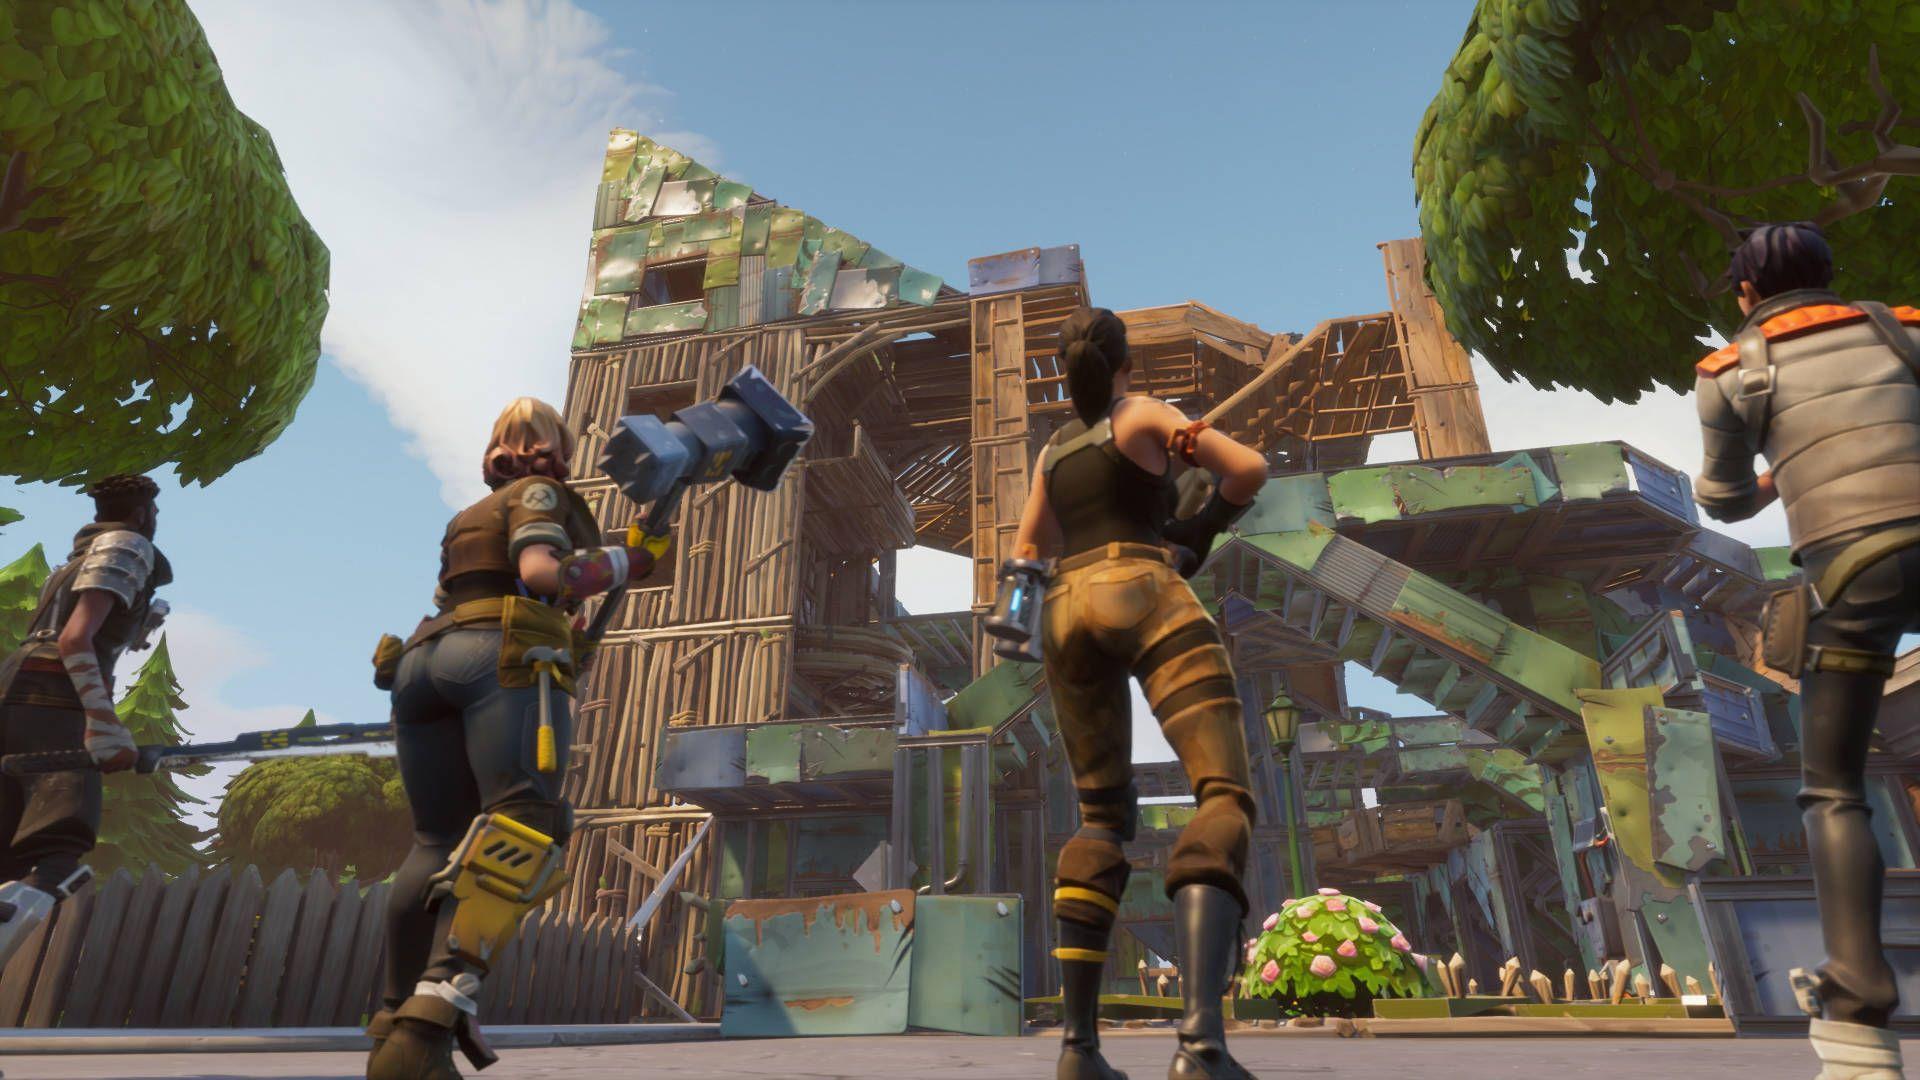 New 'Fortnite' Battle Royale Mode Misses What Makes the Game Great